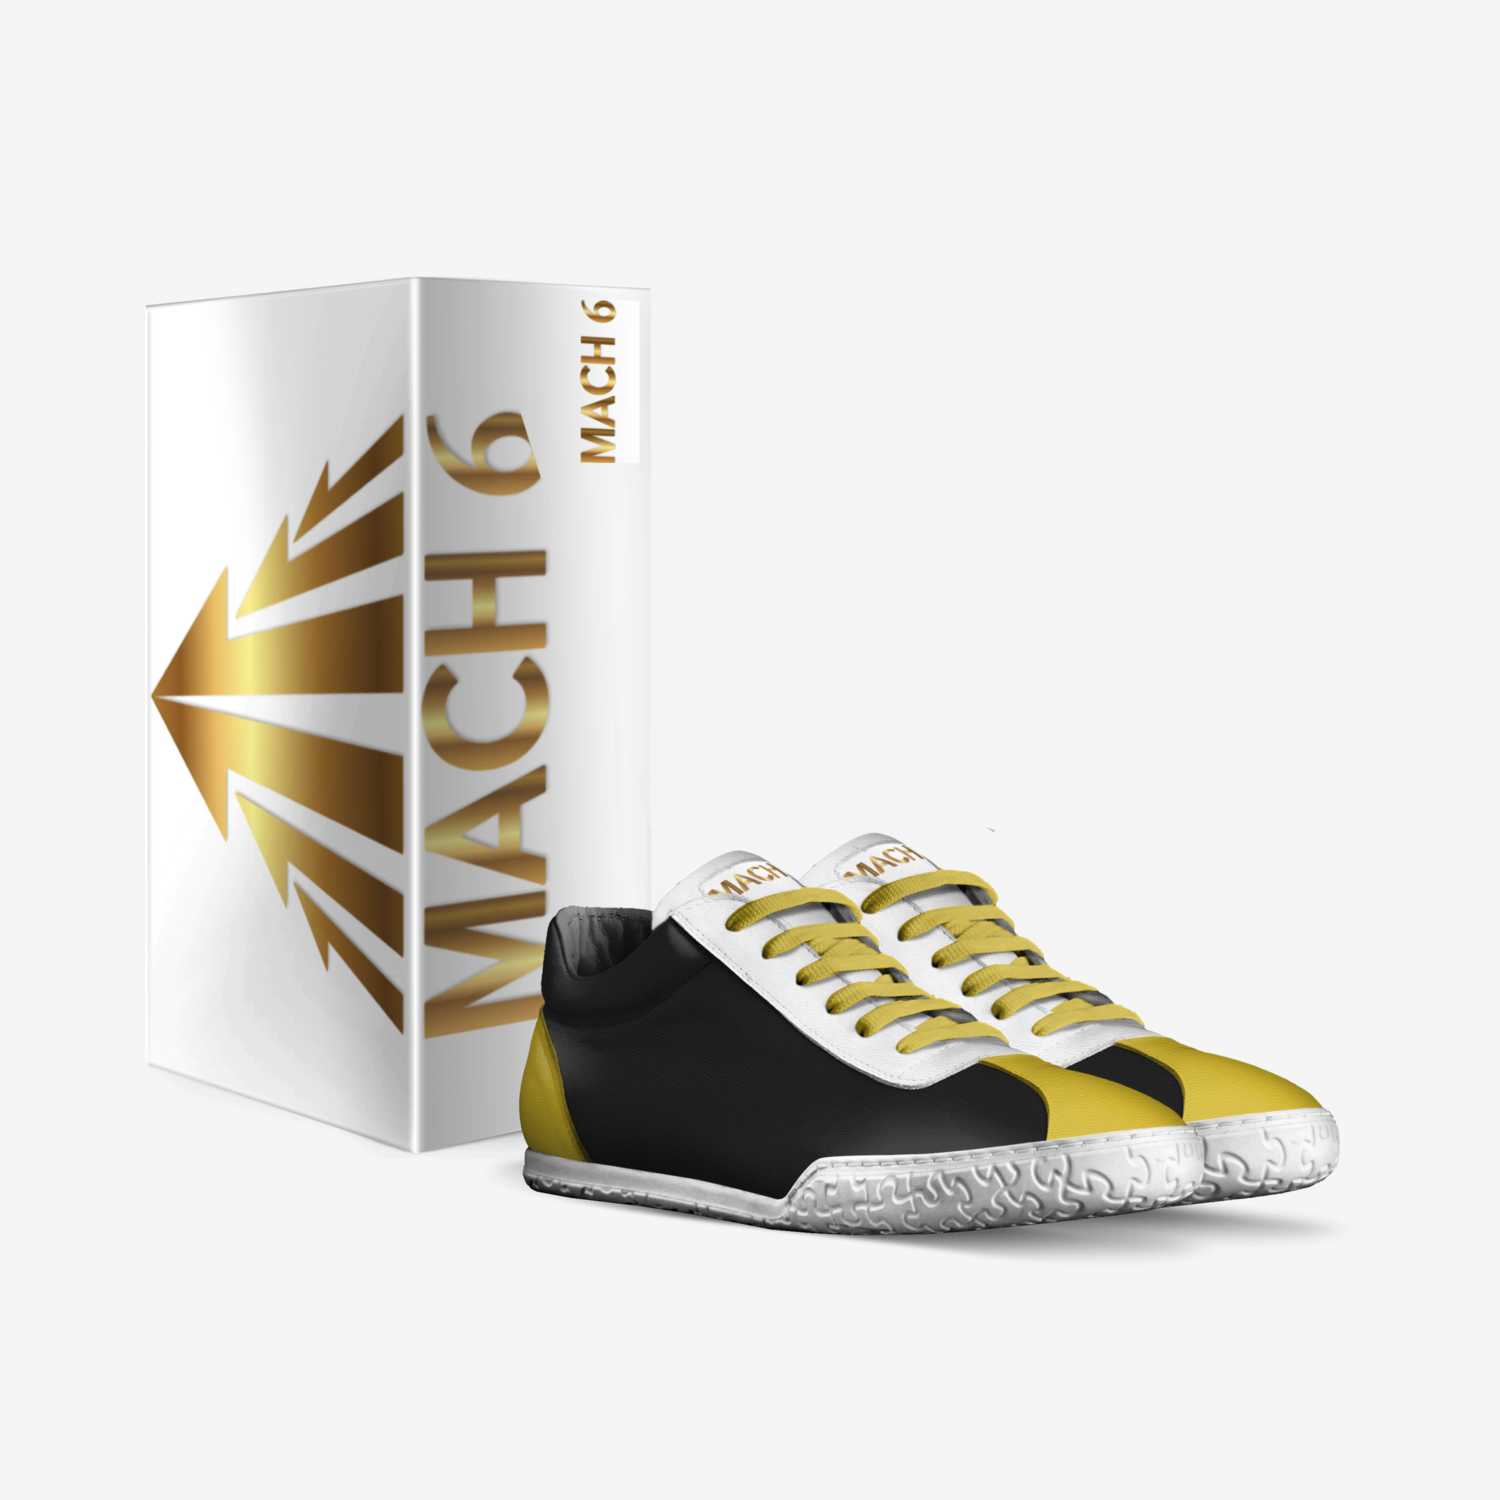 Mach 6 Trainer  custom made in Italy shoes by Lee Ofner | Box view